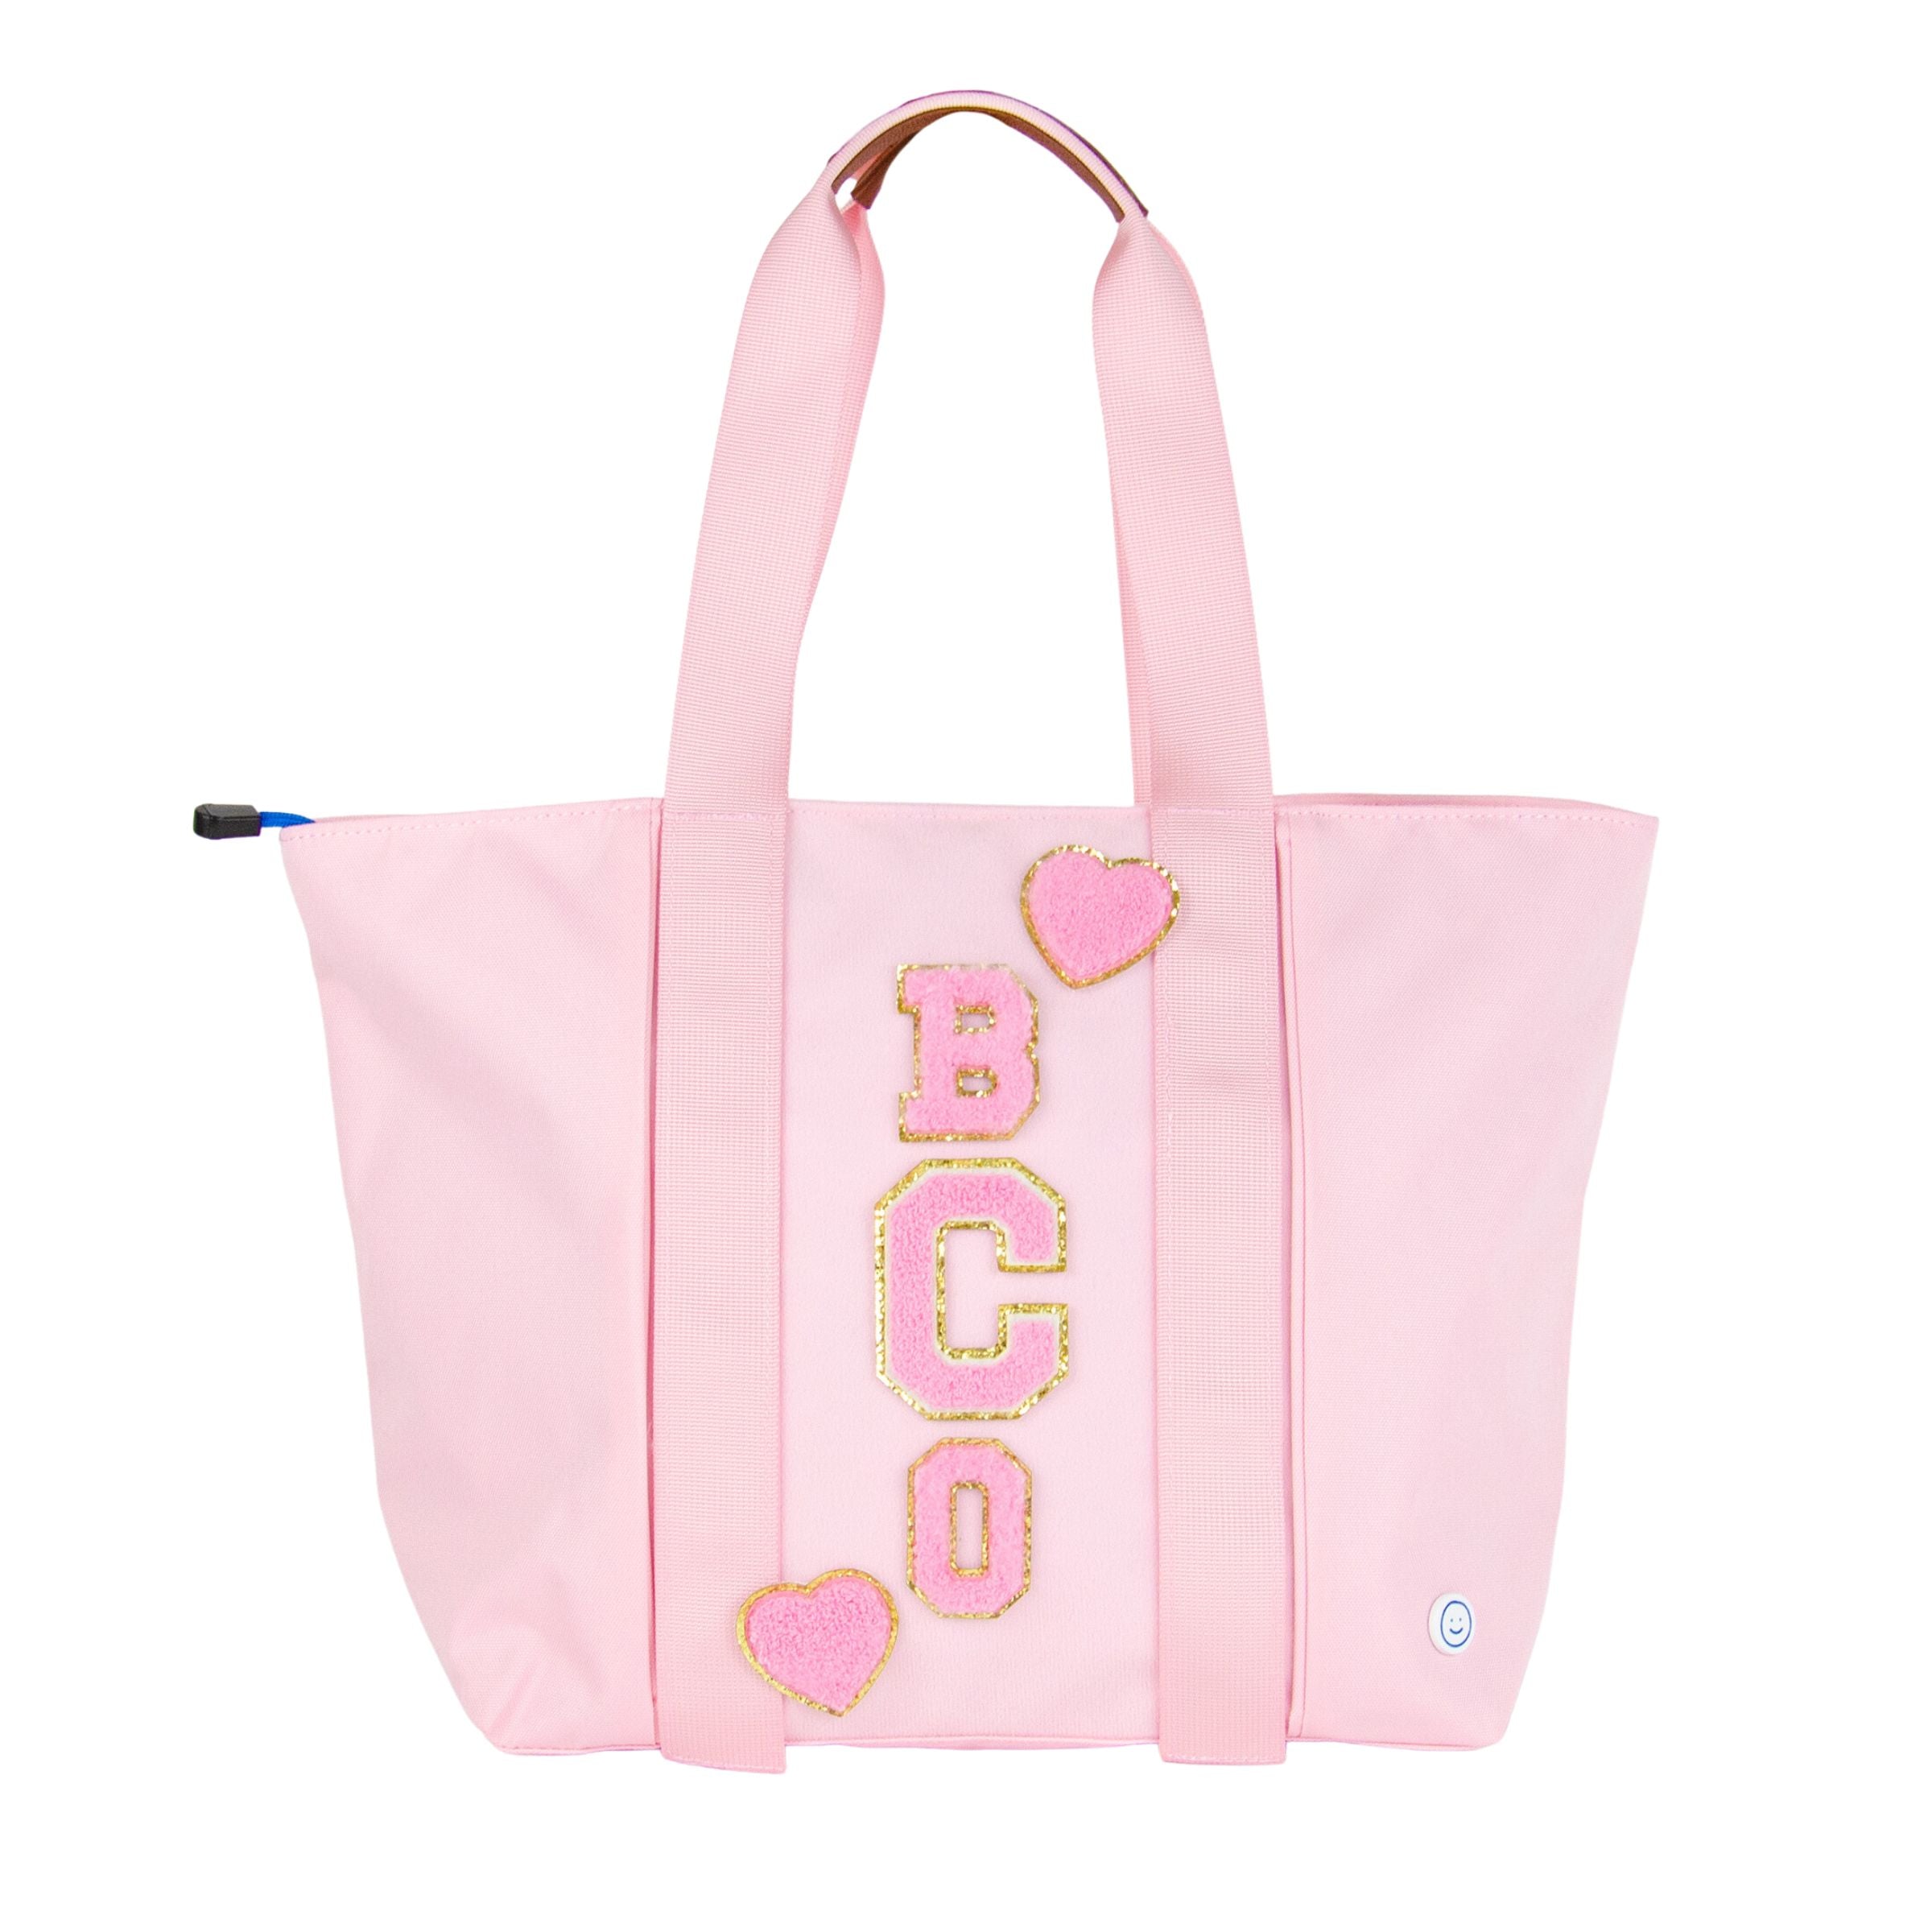 Athena Large Barocco canvas tote bag in pink - Versace